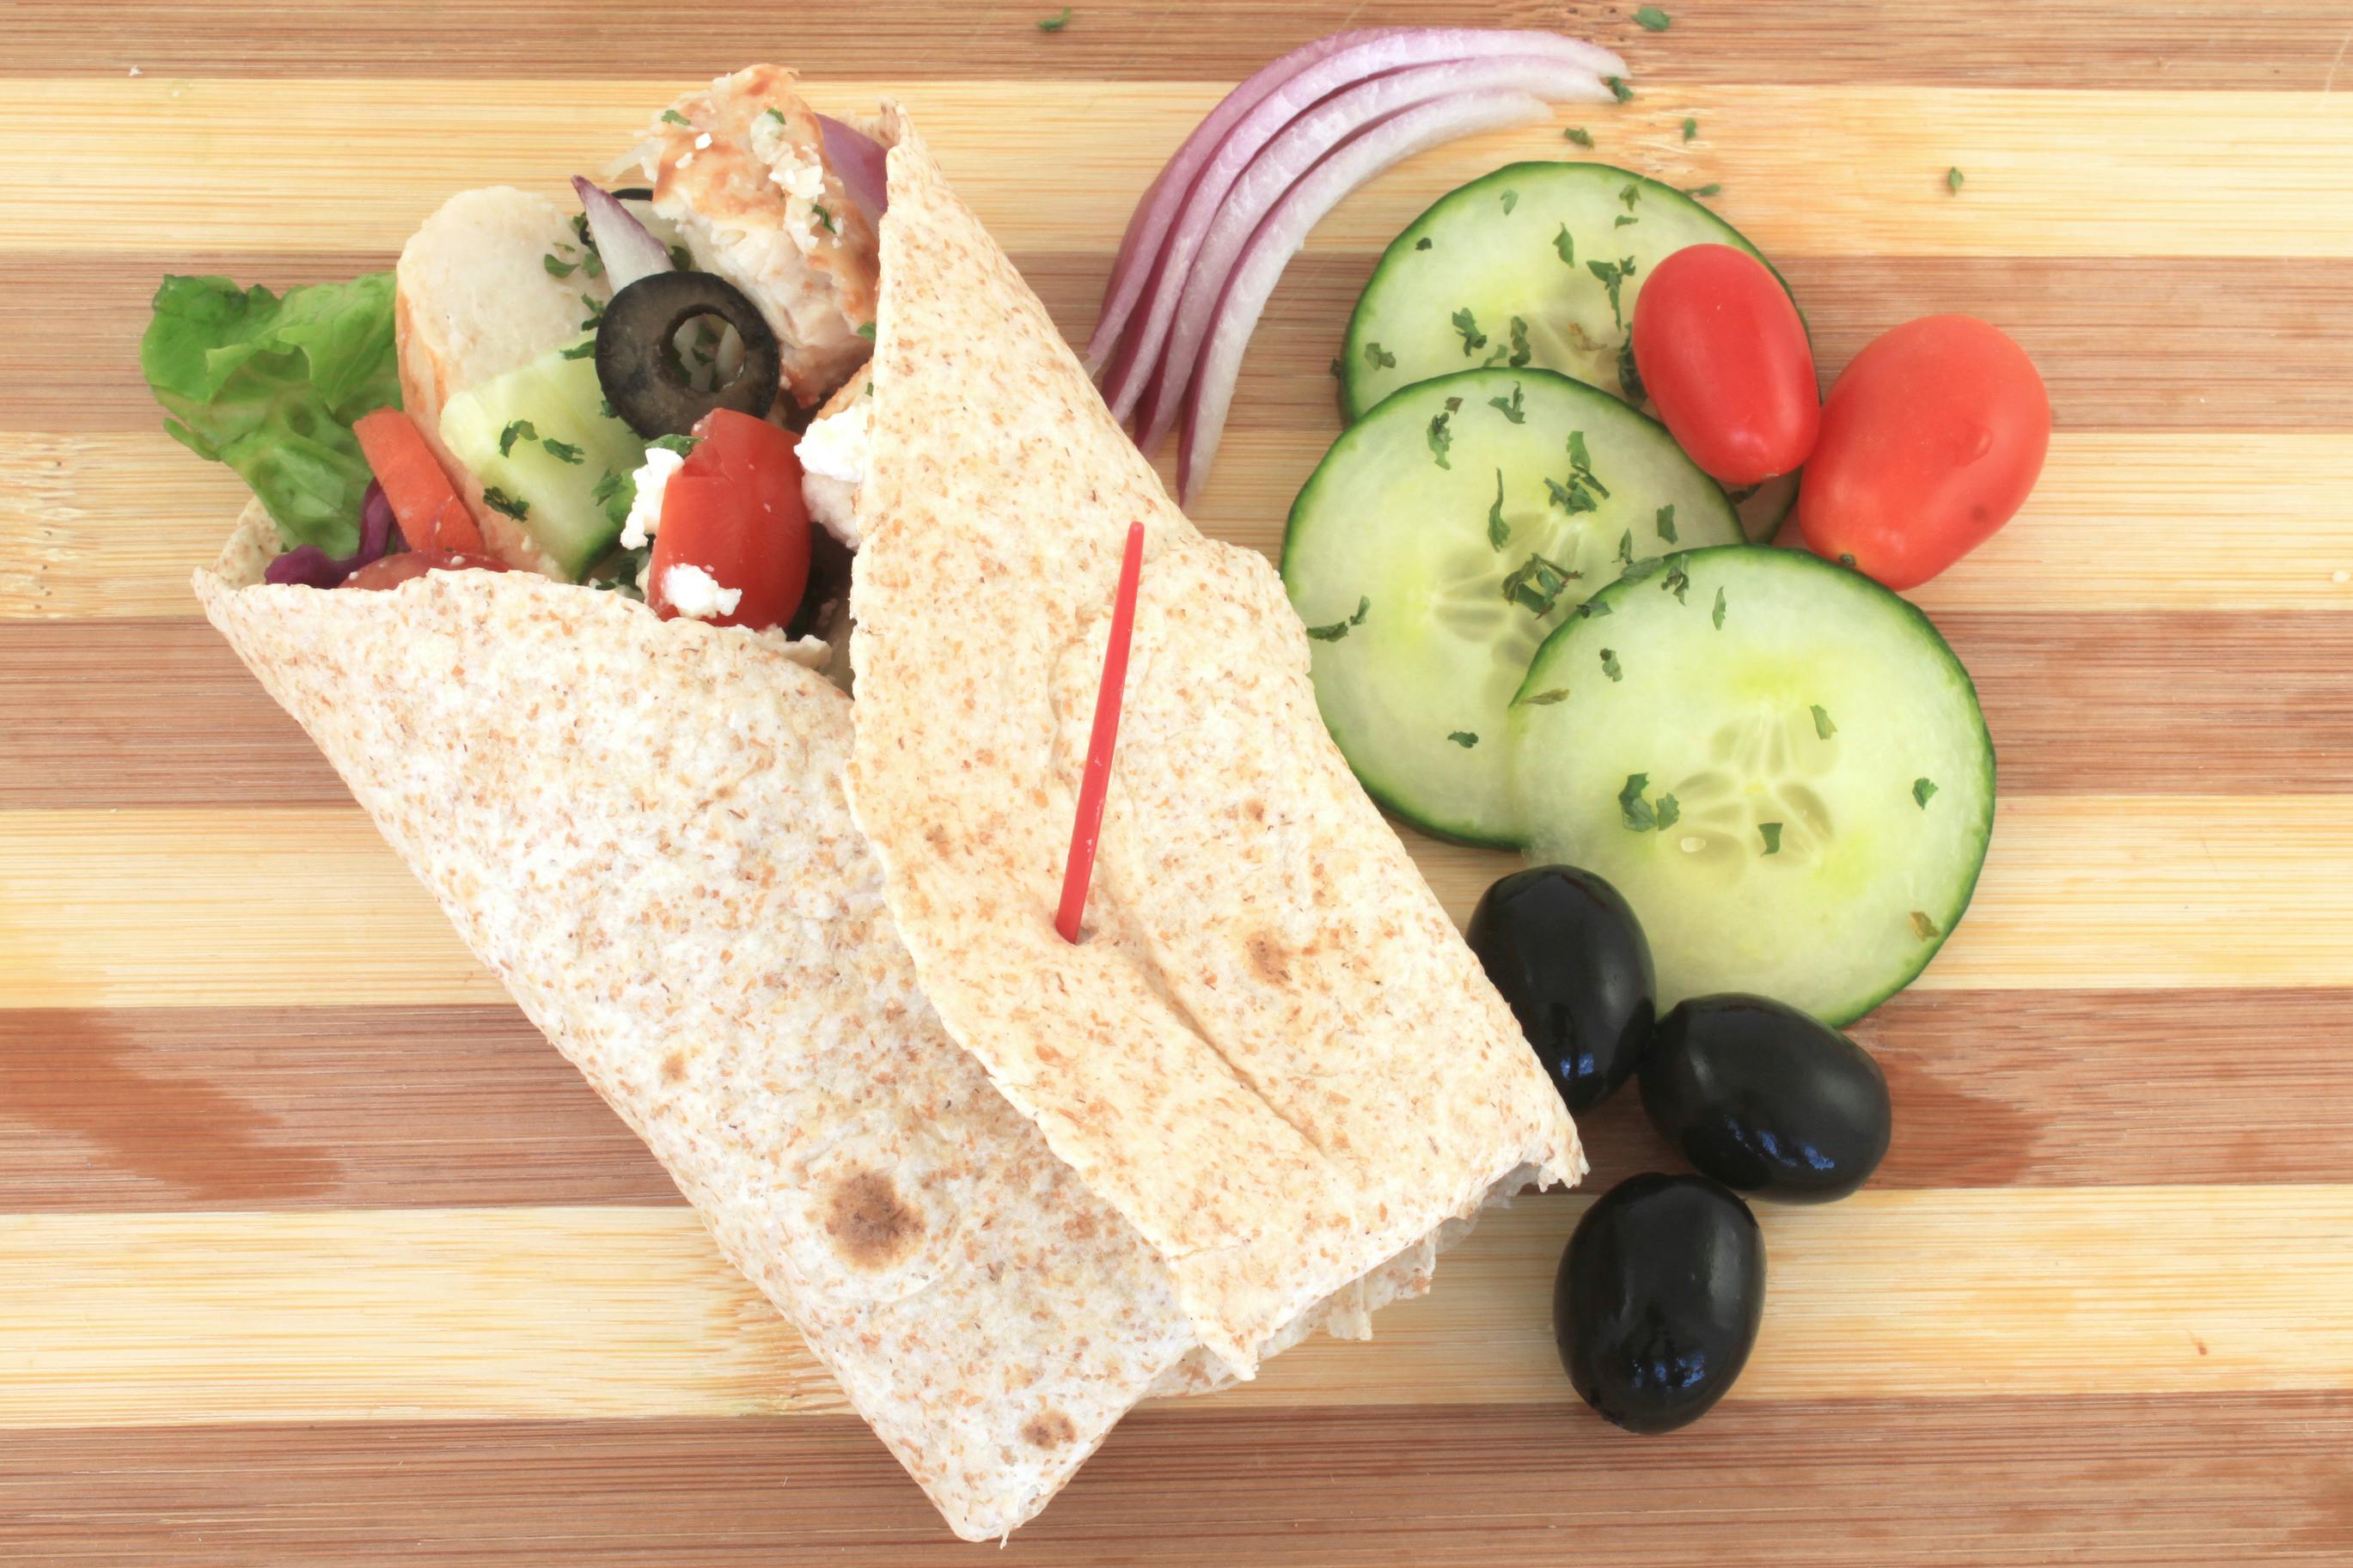 A greek chicken wrap with some ingredients on a wood surface